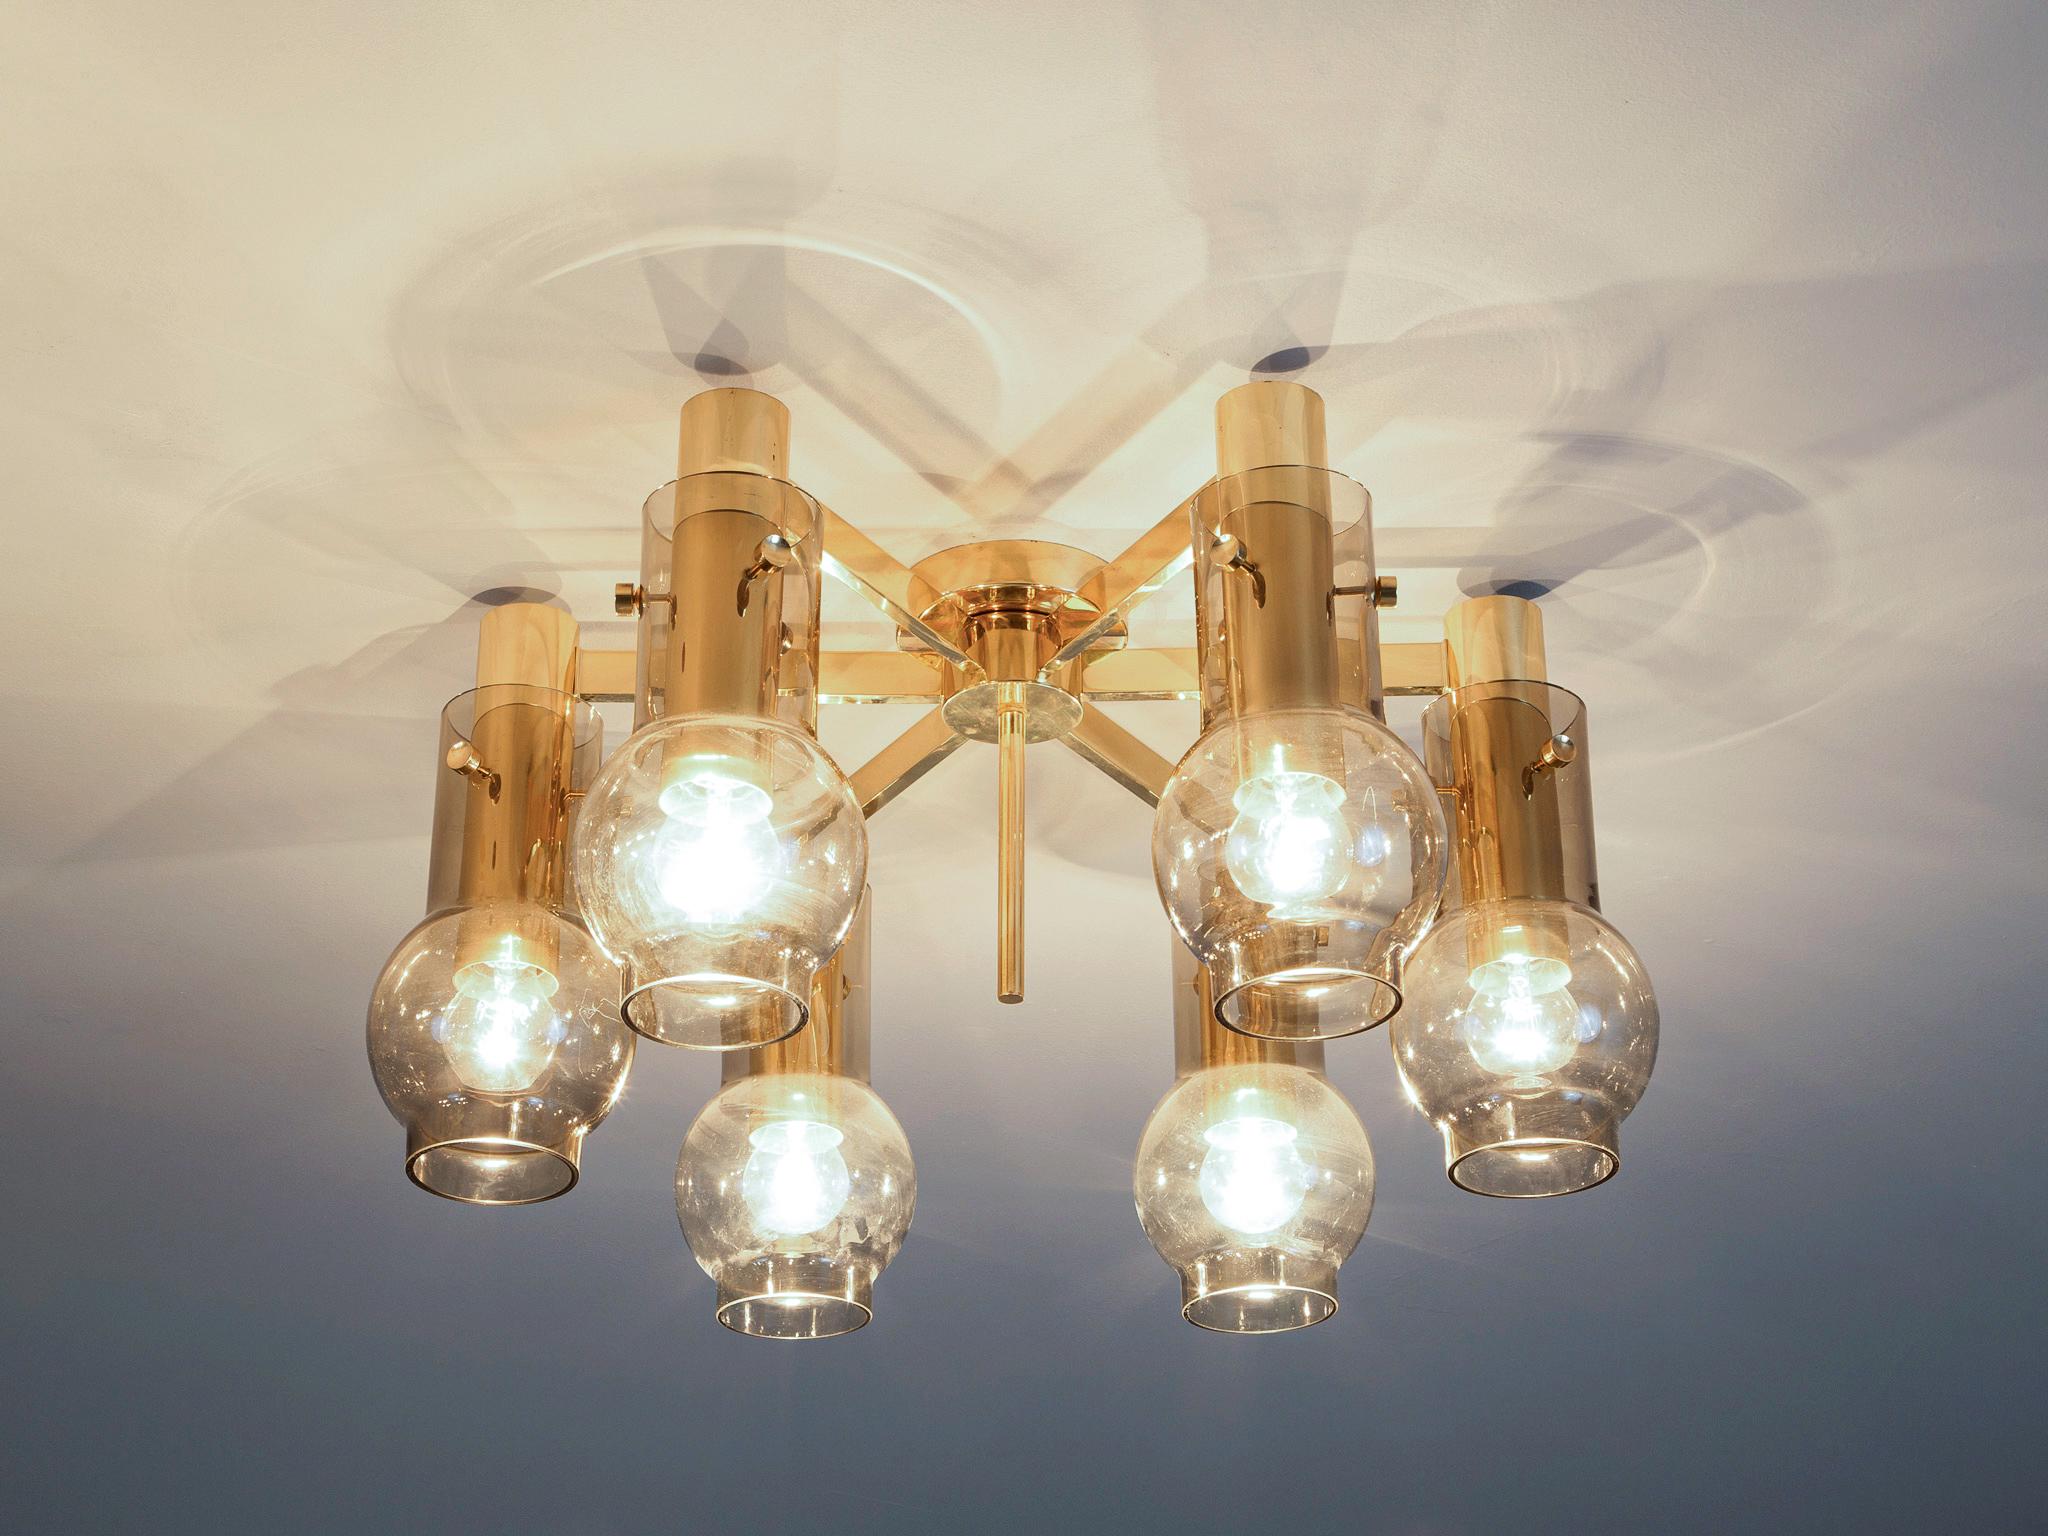 Scandinavian Modern Swedish Ceiling Lamps in Brass with Smoked Glass Shades